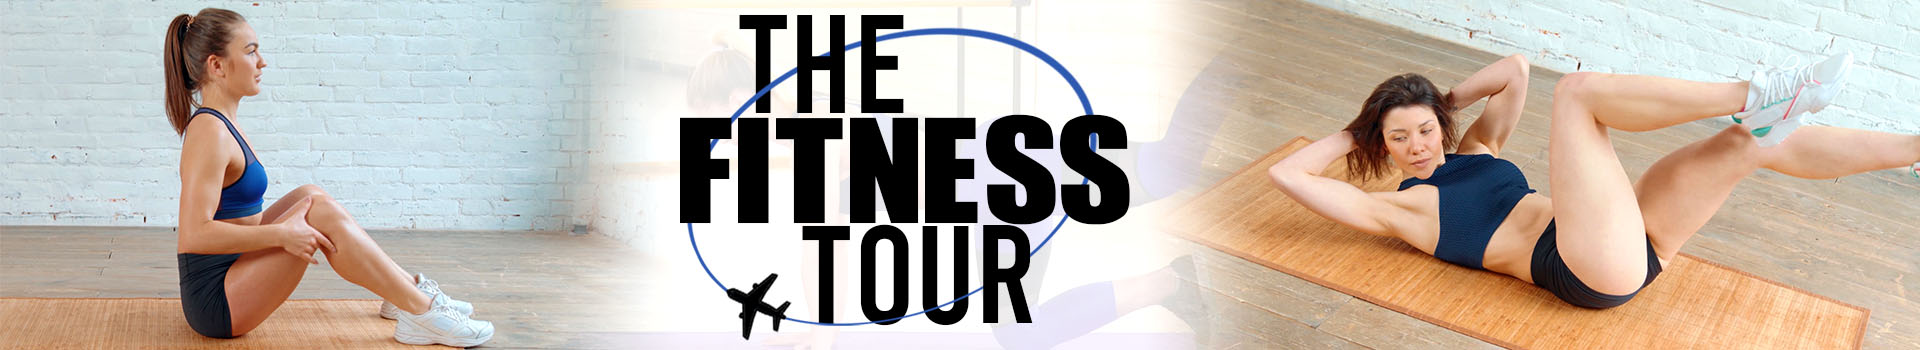 The Fitness Tour